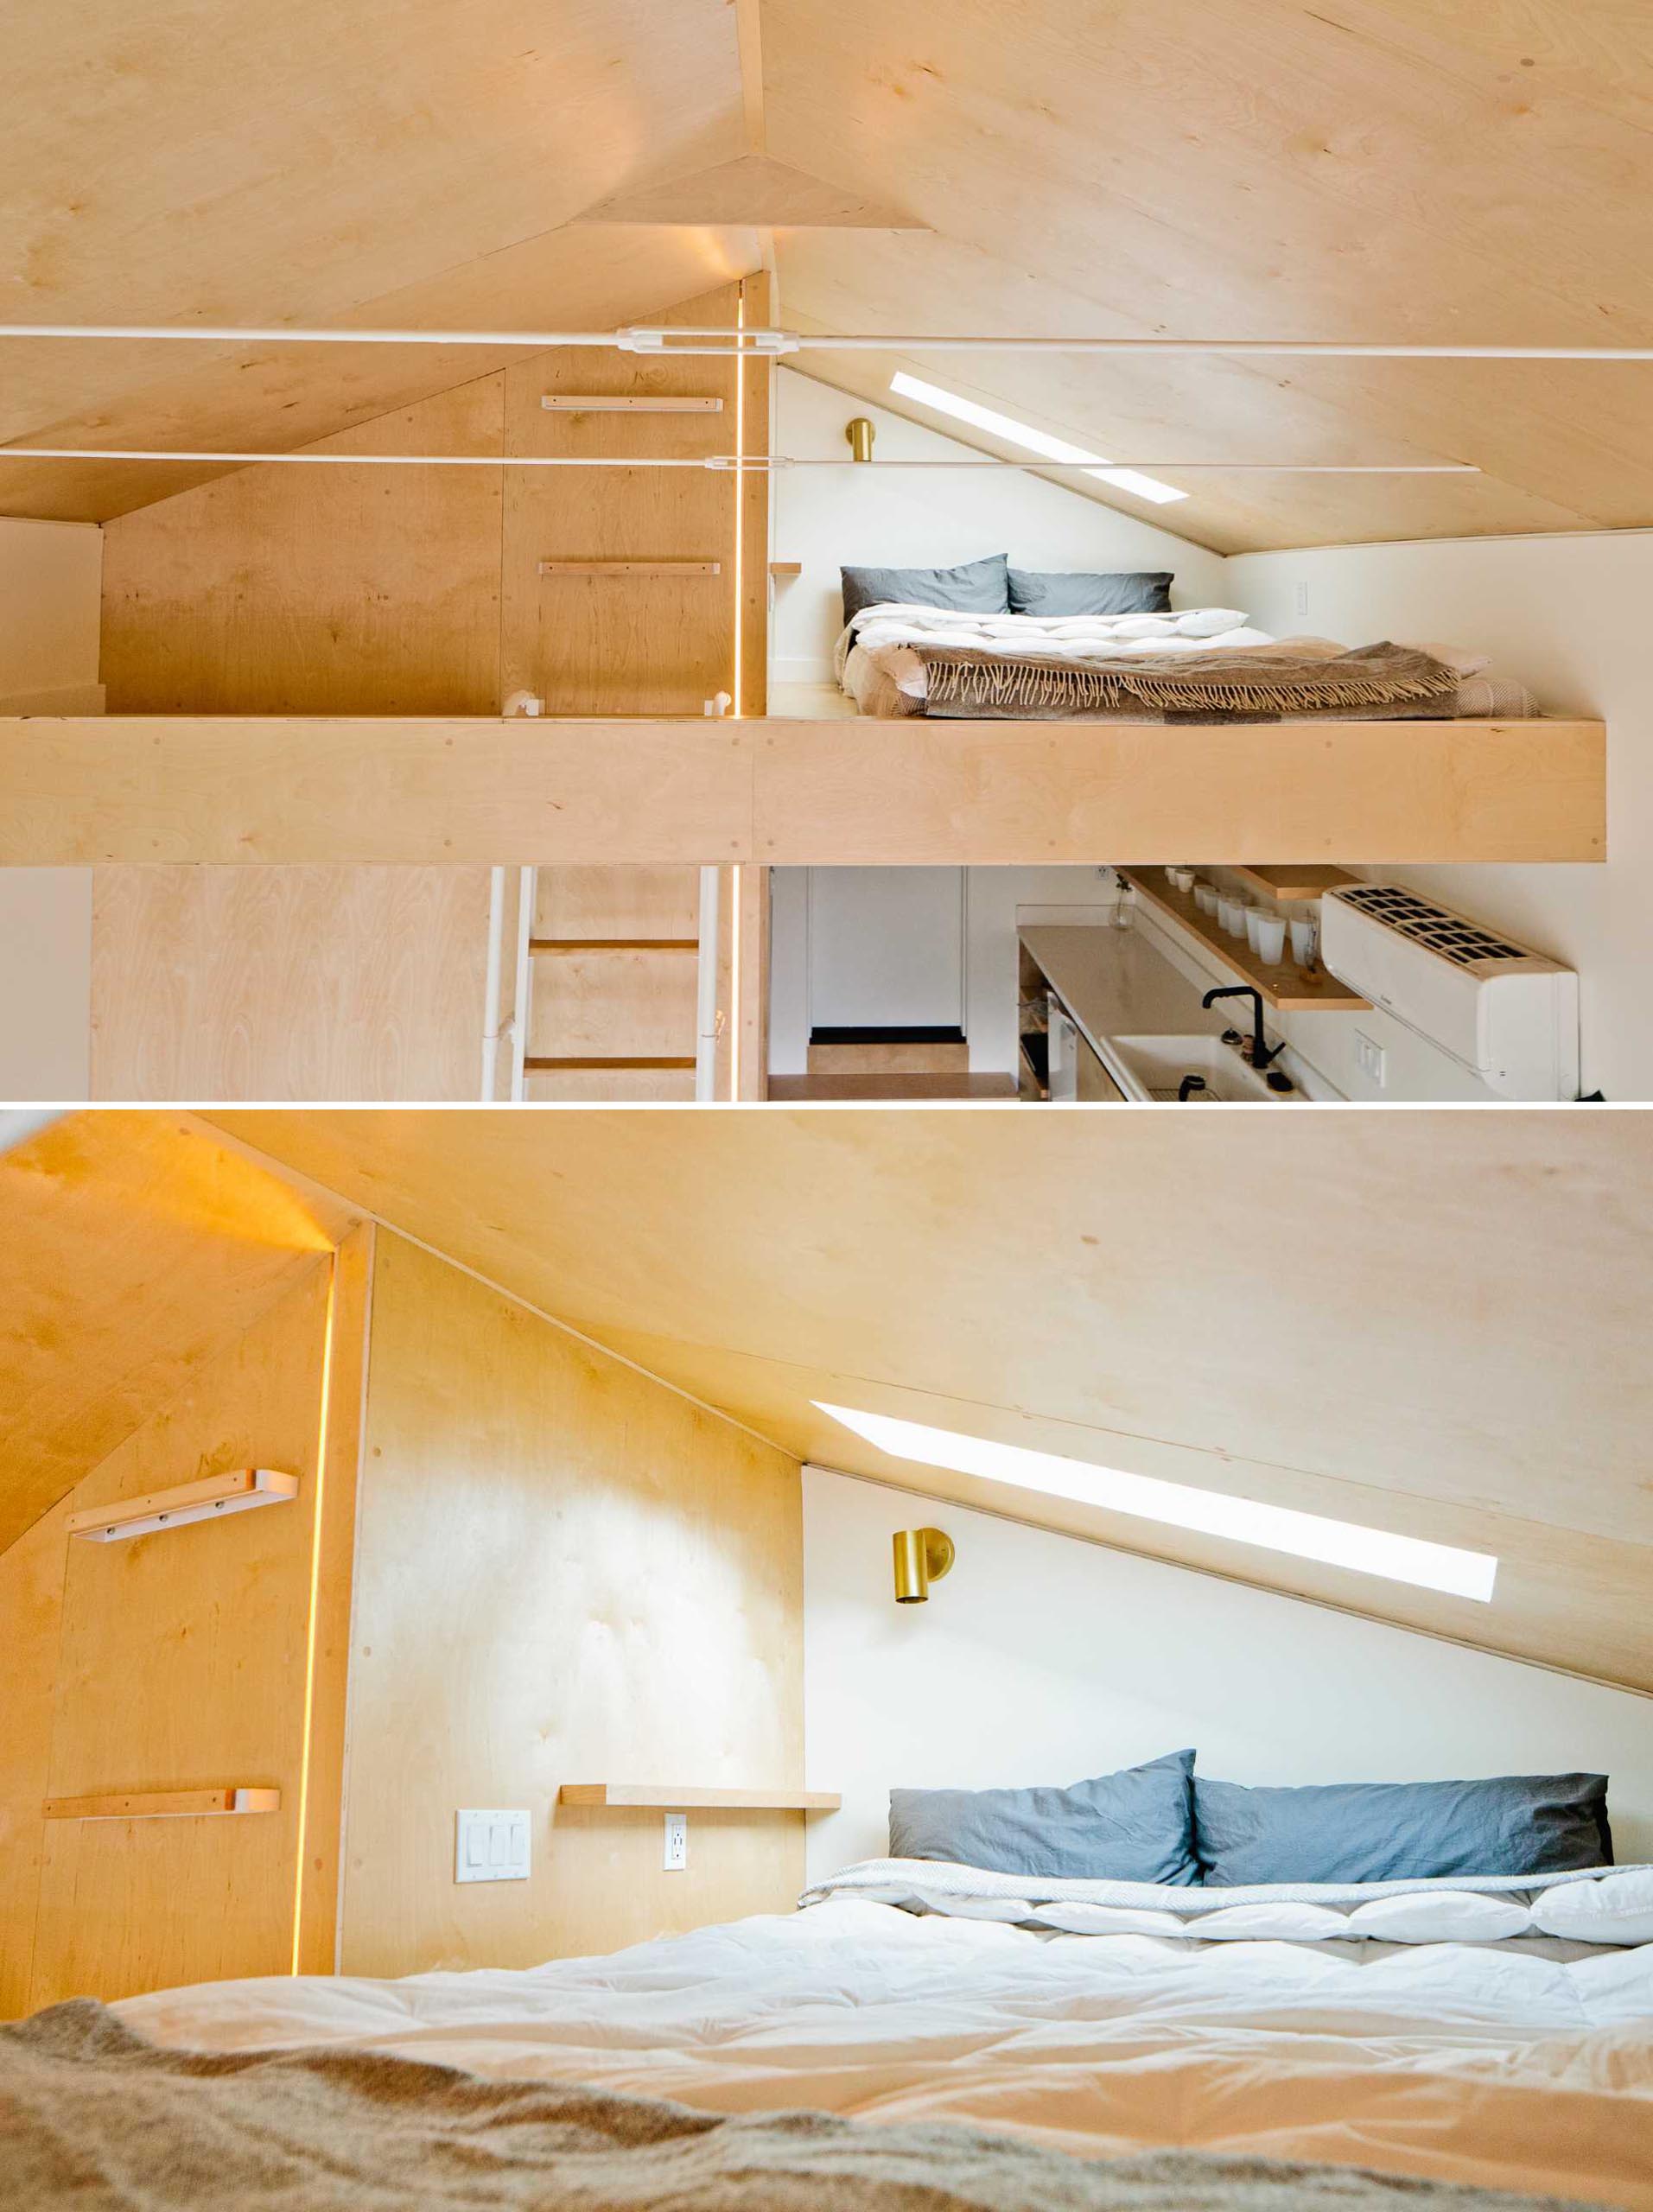 A garage was converted into an apartment with a loft bedroom.